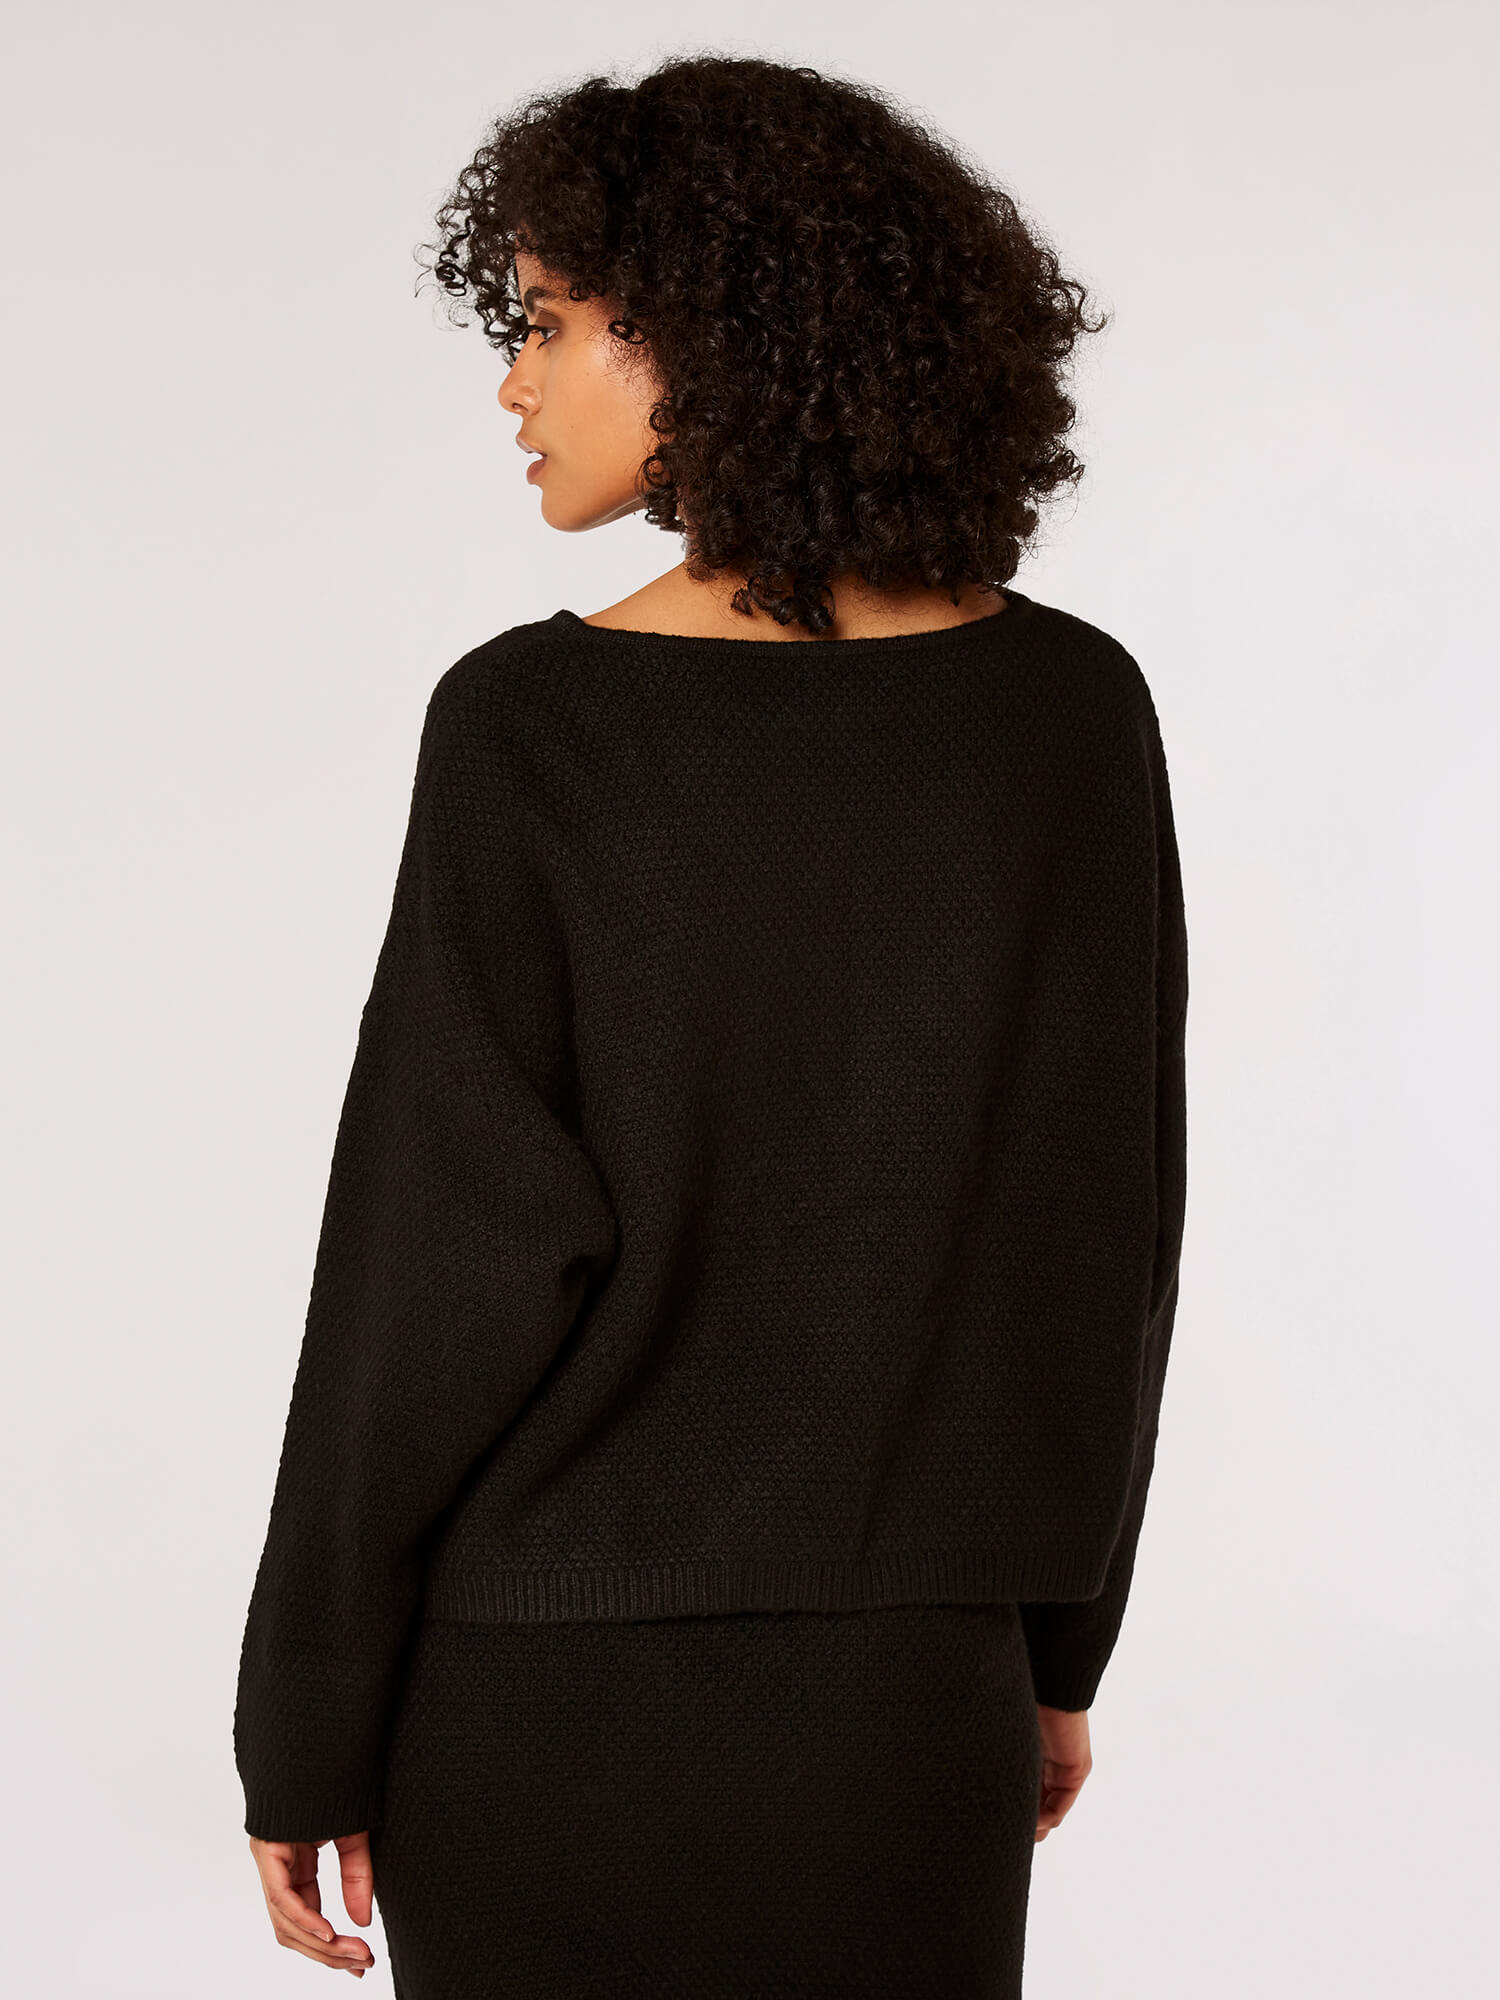 Apricot 785700 black batwing knitted sweater